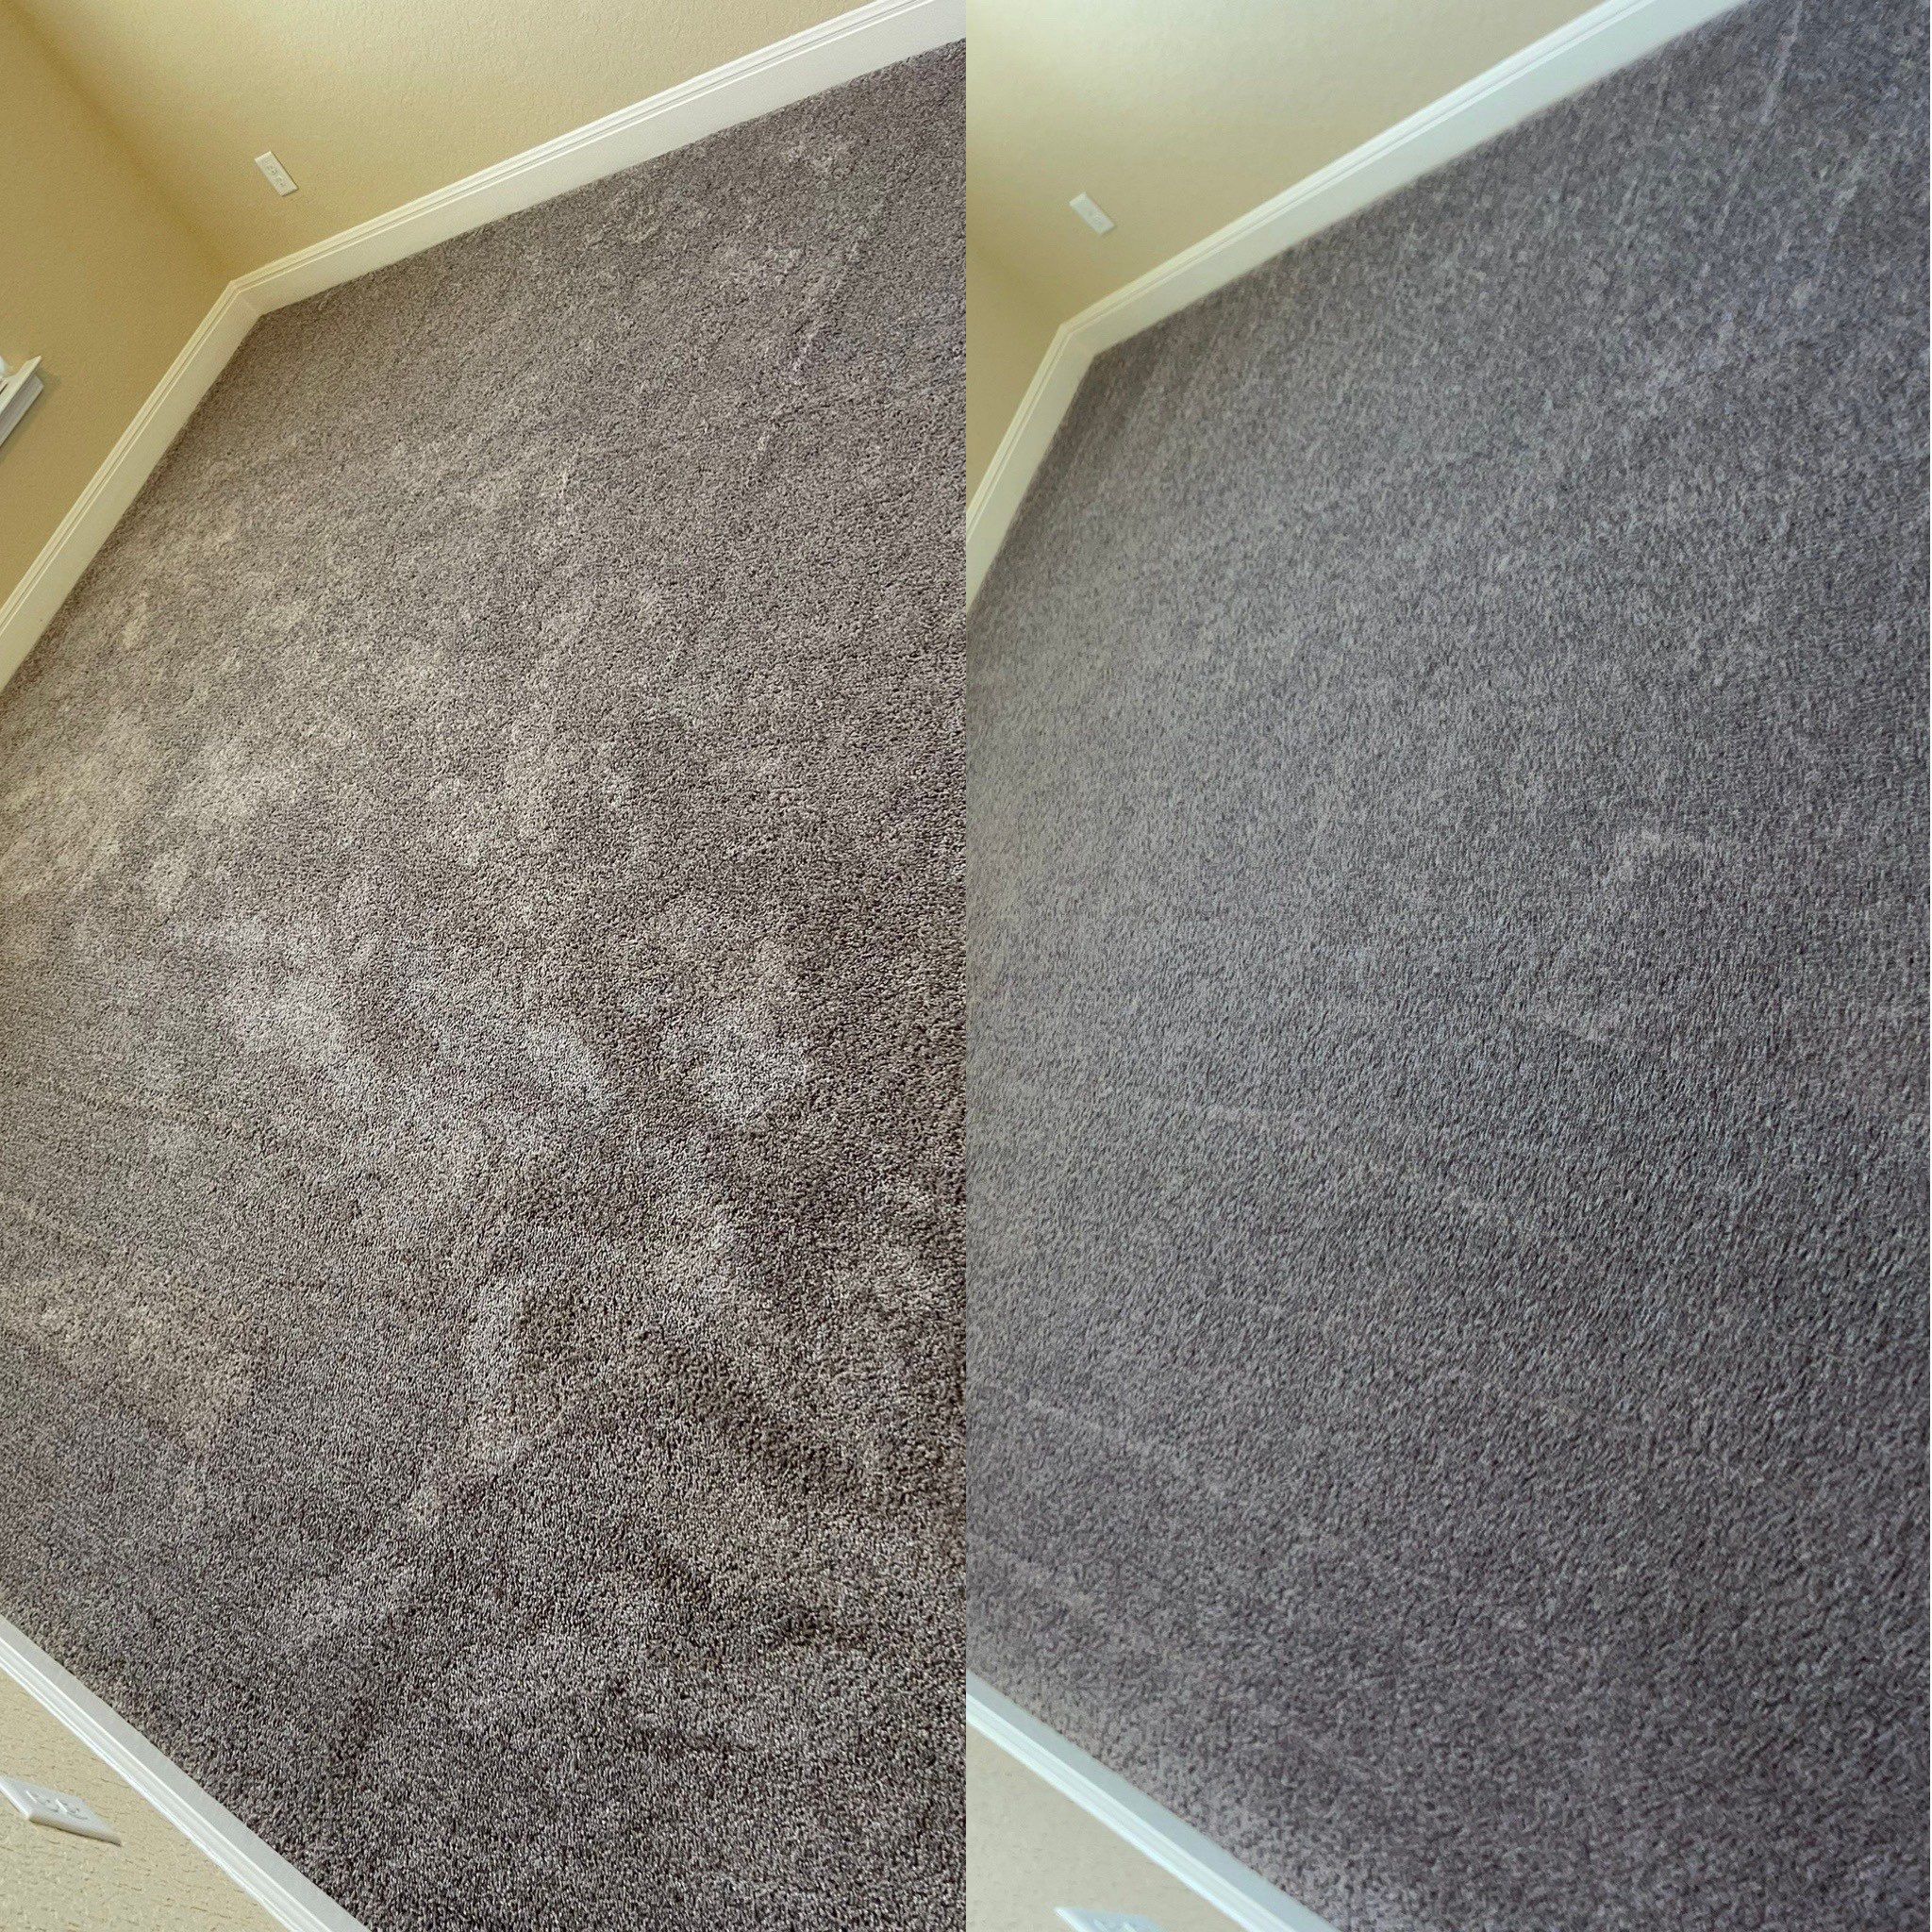 carpet cleaning service shown with a comparison before and after cleaning demonstrating effective removal of stains and dirt